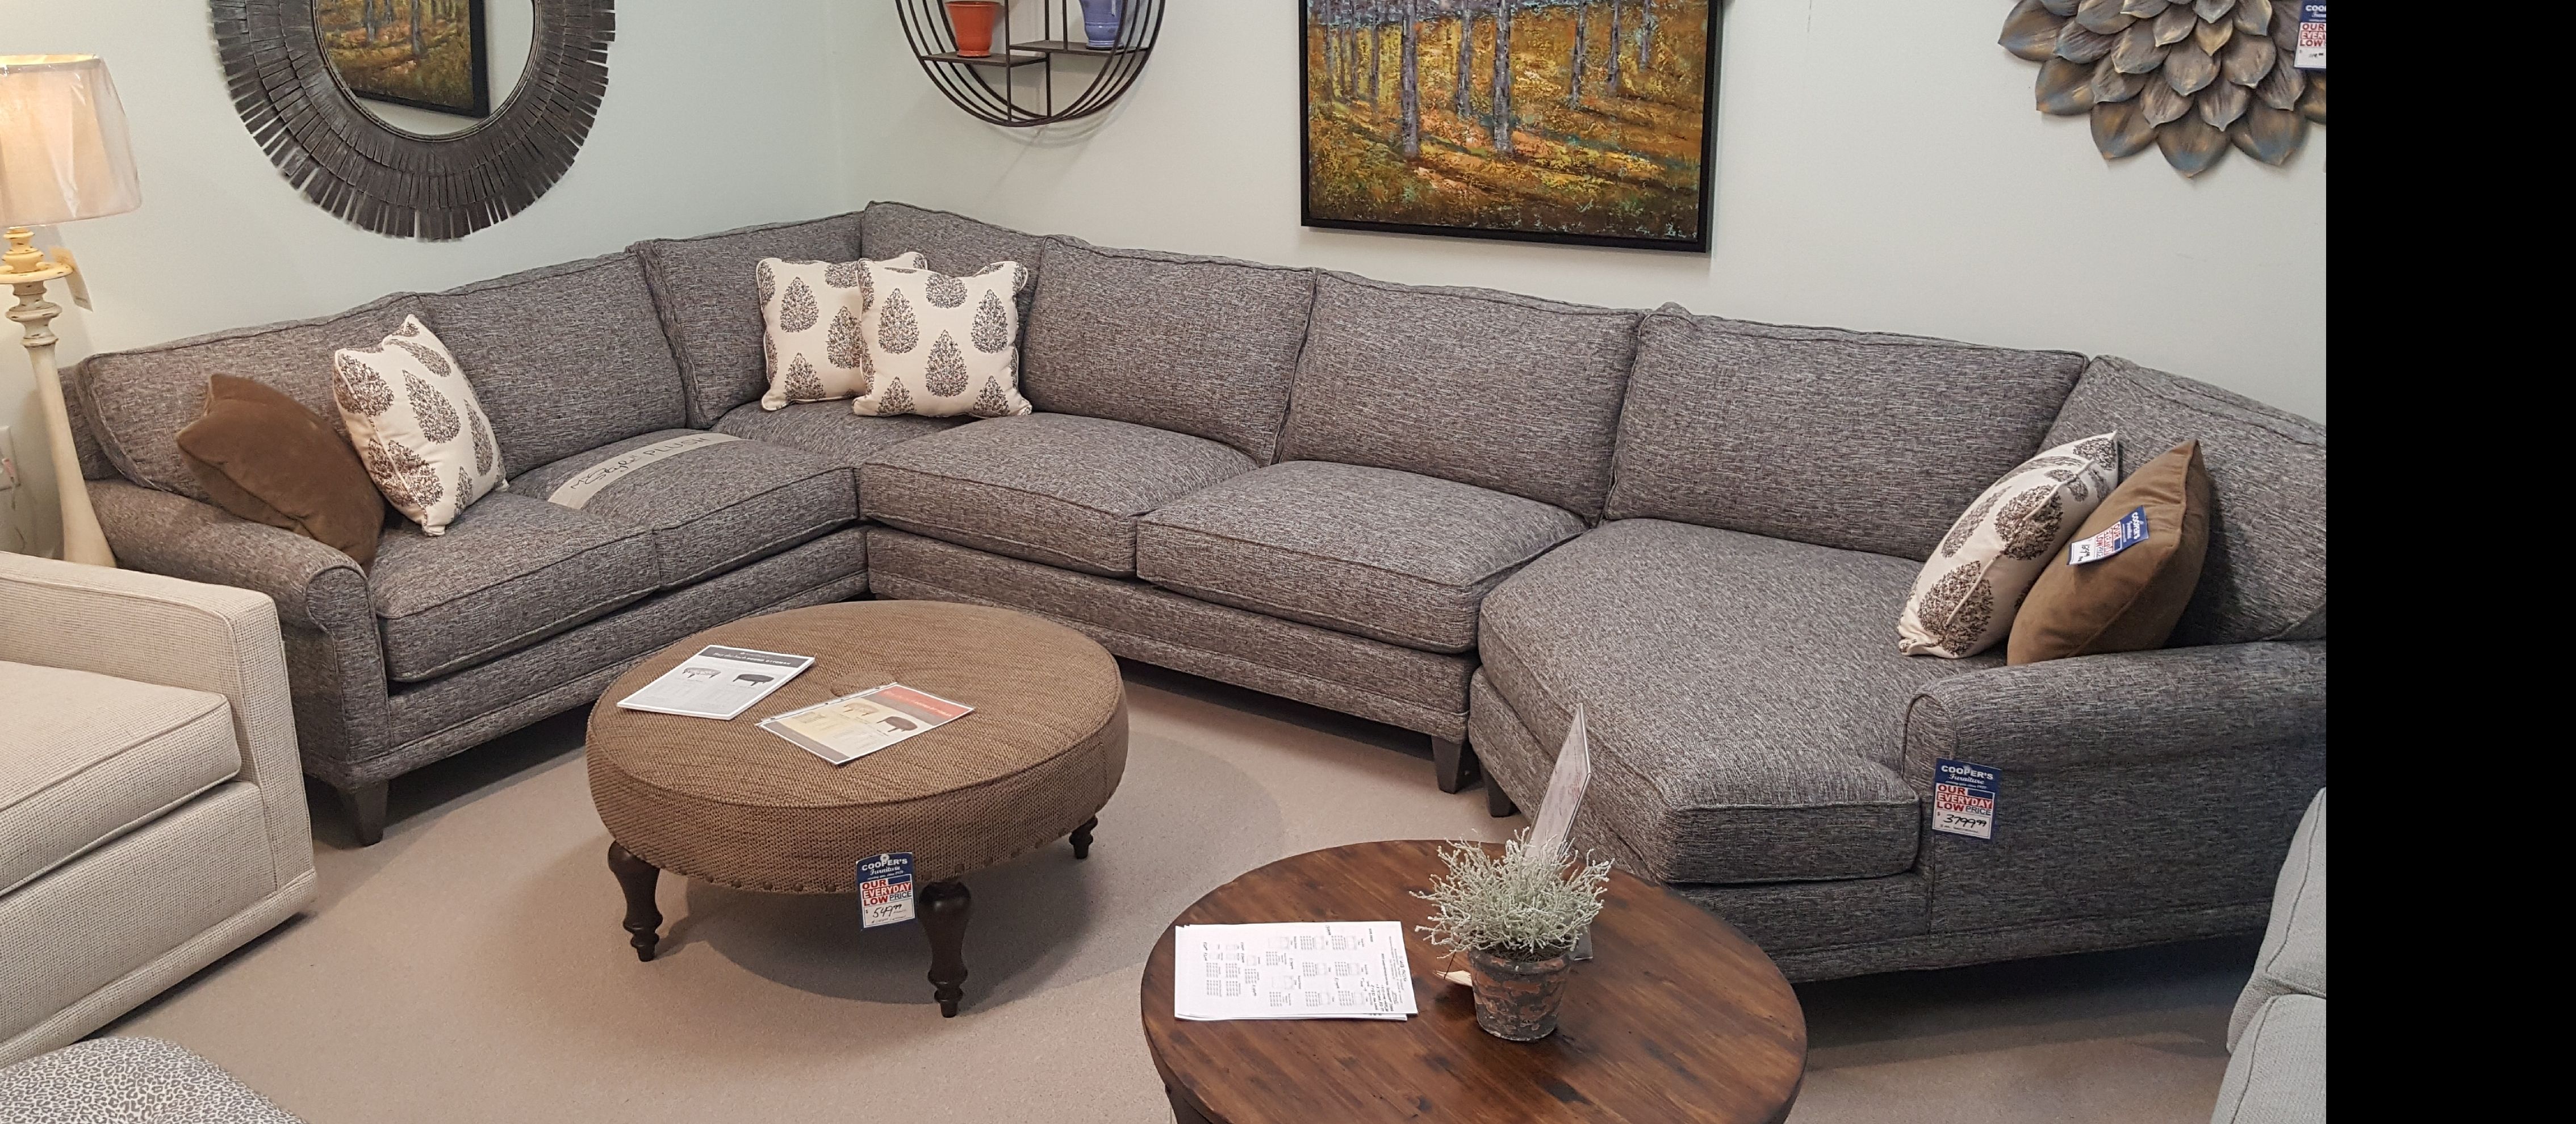 Living Room Furniture Cary Nc | Sofas, Recliners, Sectionals Intended For Durham Region Sectional Sofas (View 1 of 10)